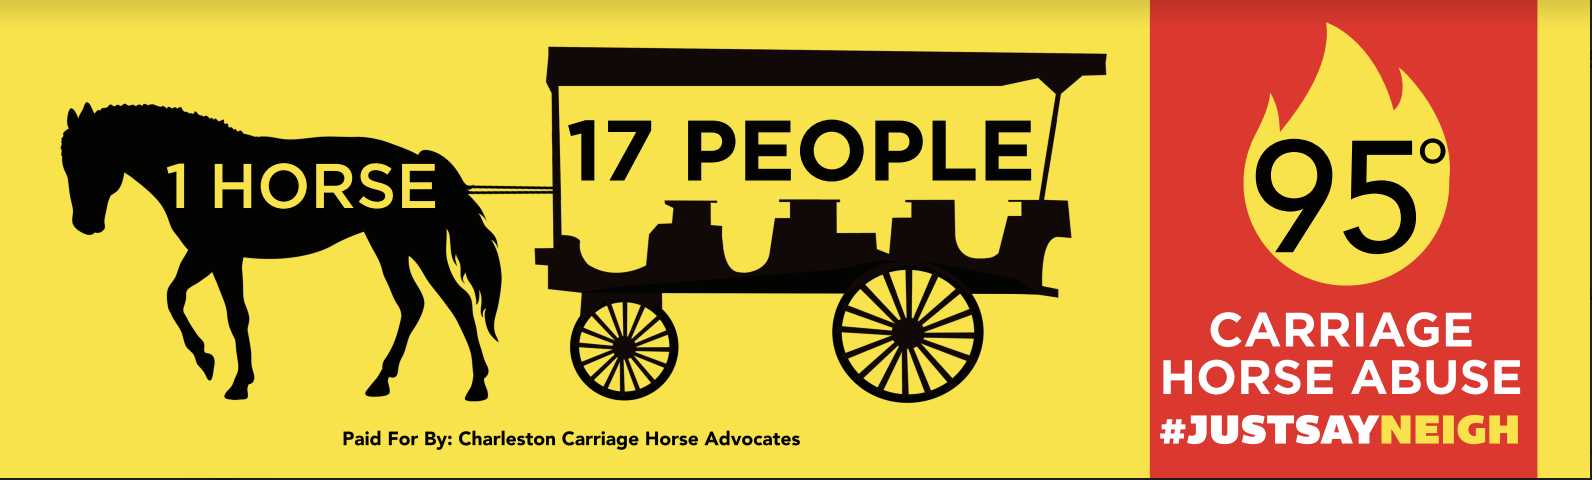 Banner that says "1 horse 17 people 95° carriage horse abuse #justsayneigh"